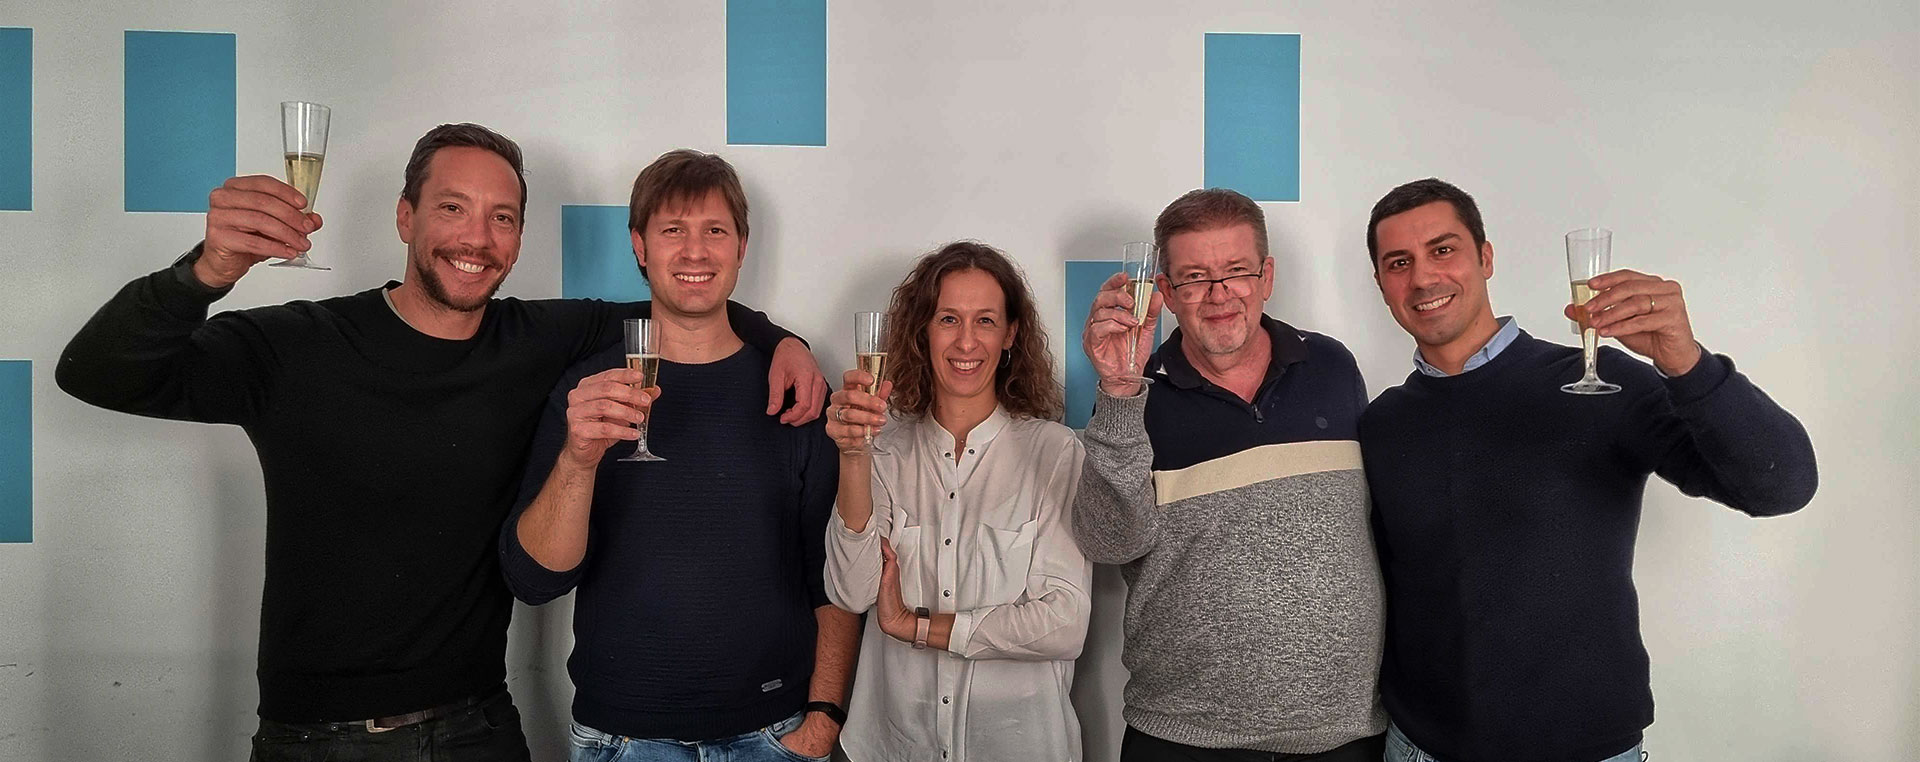 LORIOT management  celebrating the incestment closing